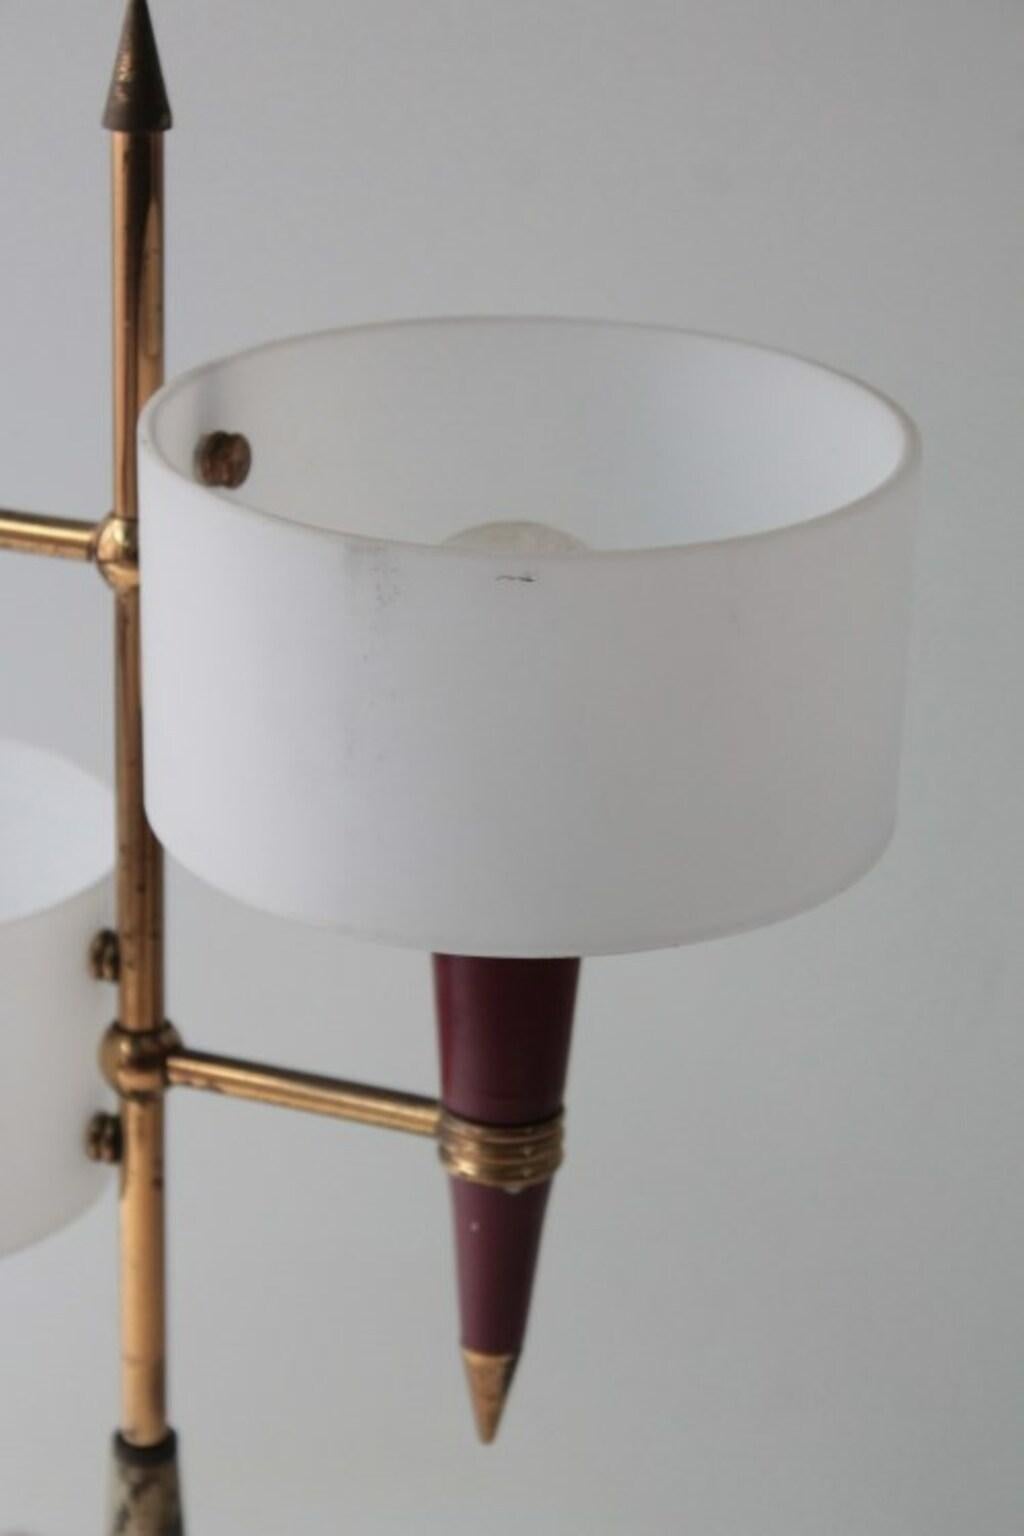 Wonderful table lamp 1950s Italian manufacturing with marble base and brass structure.